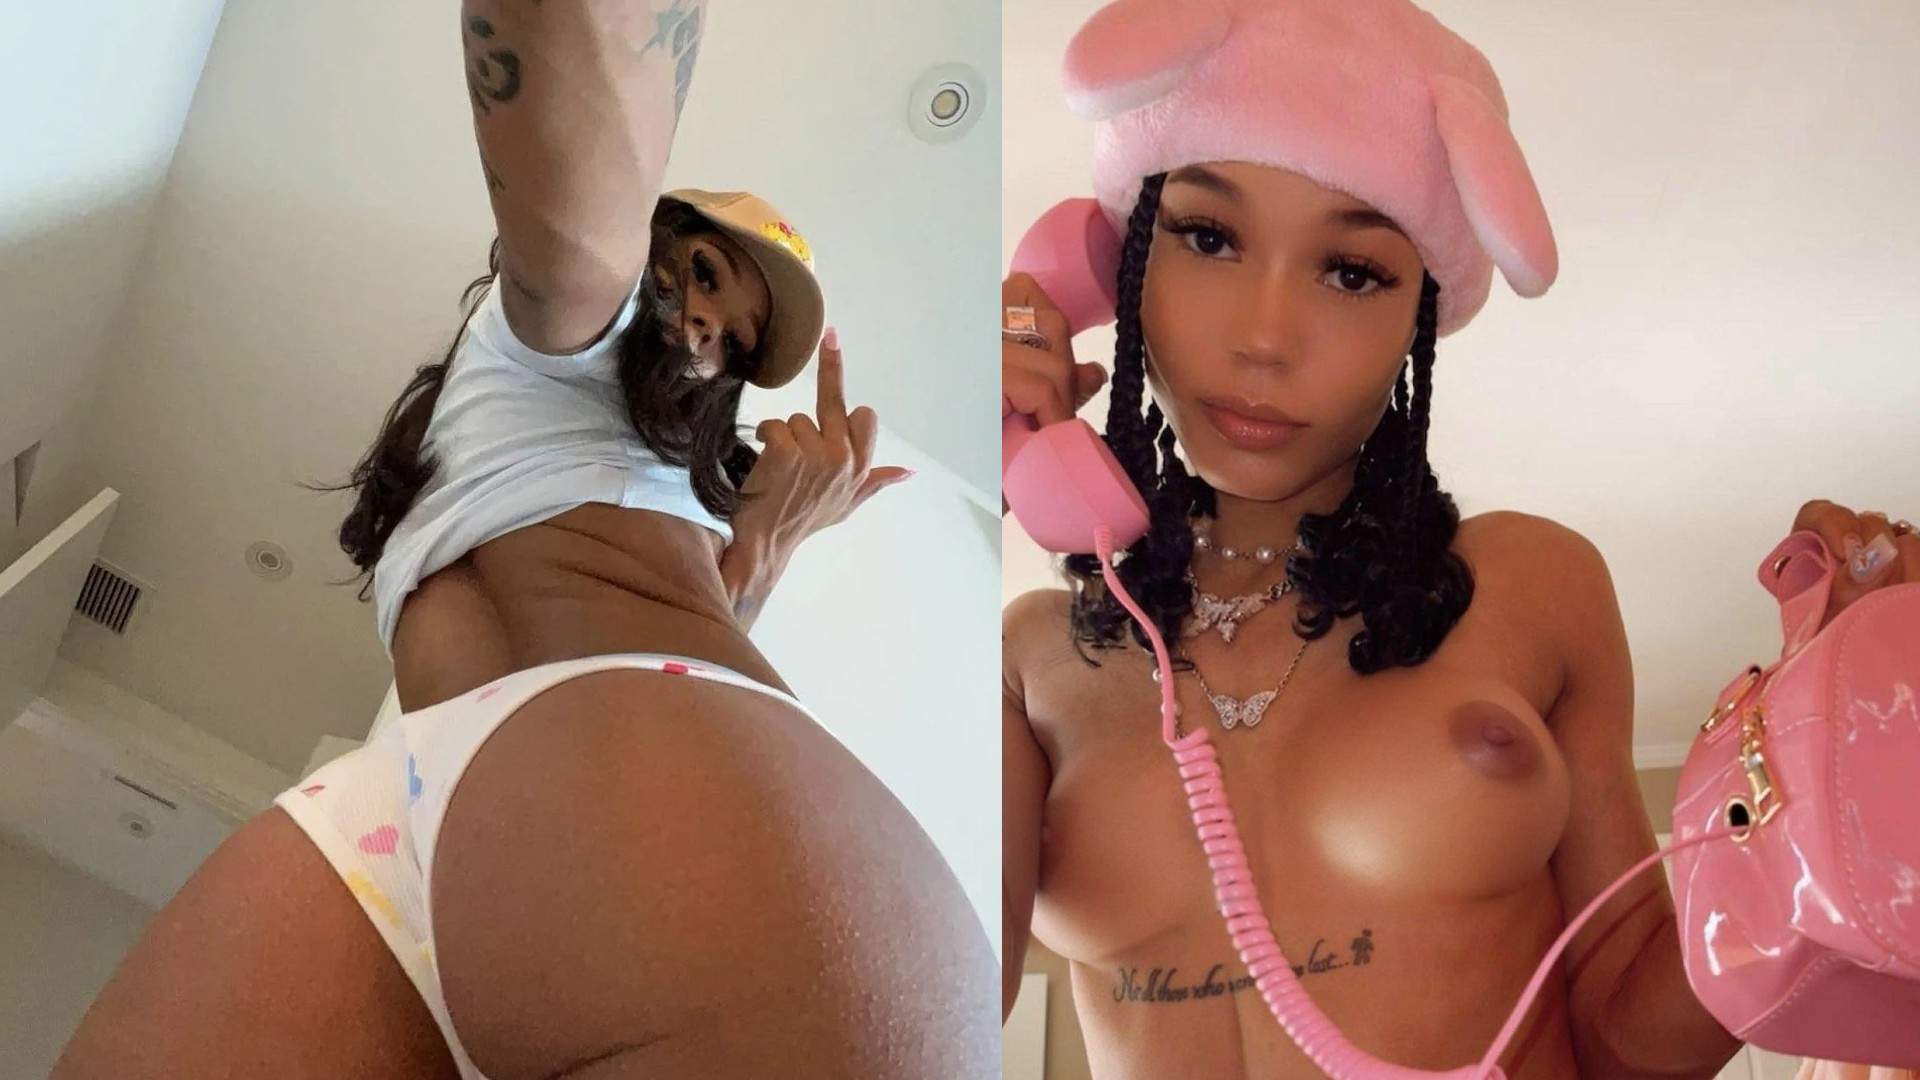 Coi Leray Nudes, pictures and naked videos of her boobs & ass and other...